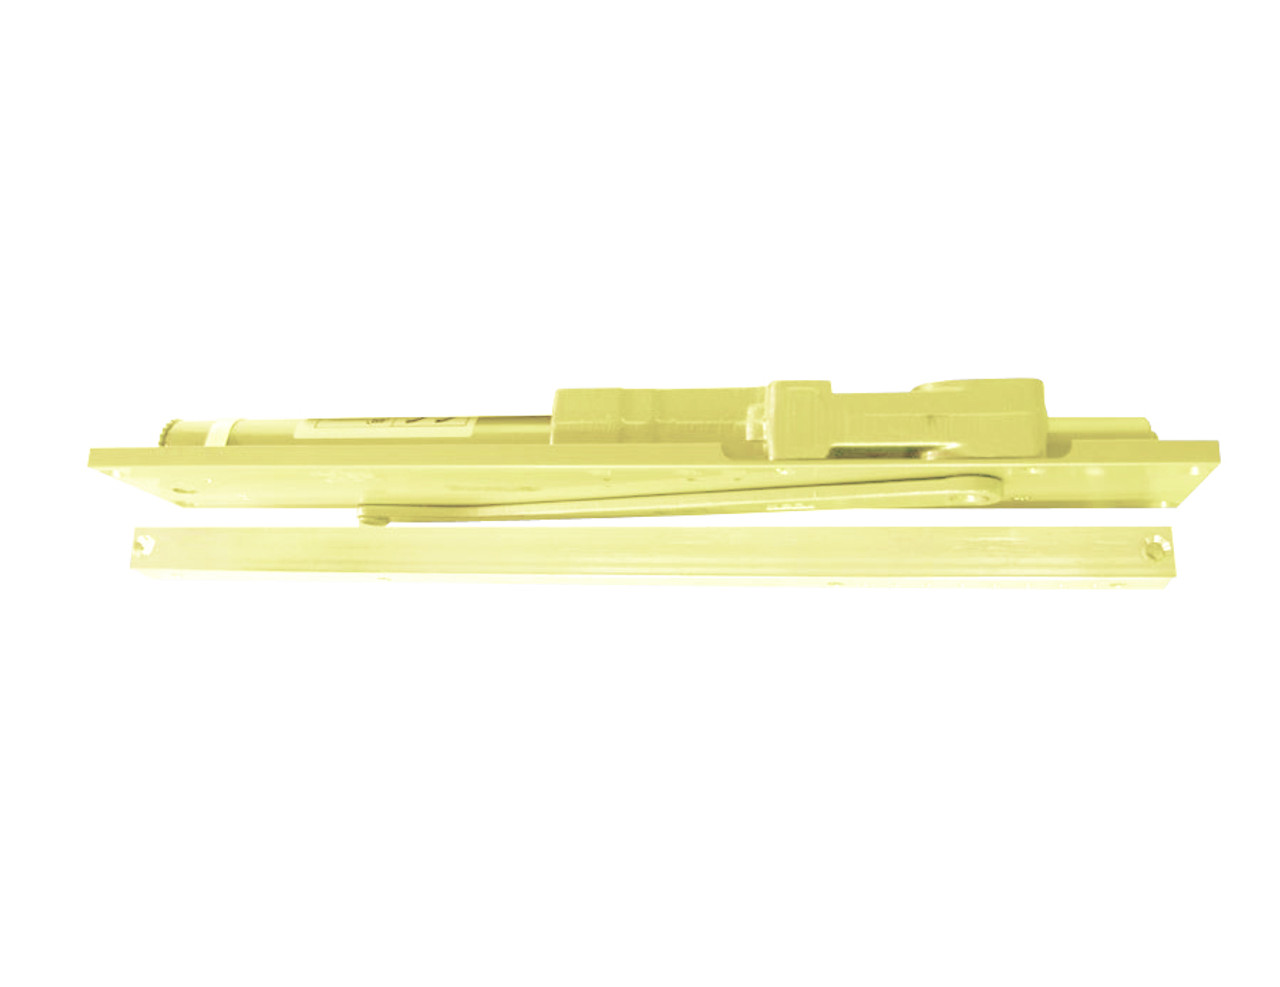 6032-BUMPER-US3 LCN Double Acting Concealed Door Closer Standard Track with Bumper Arm in Bright Brass Finish